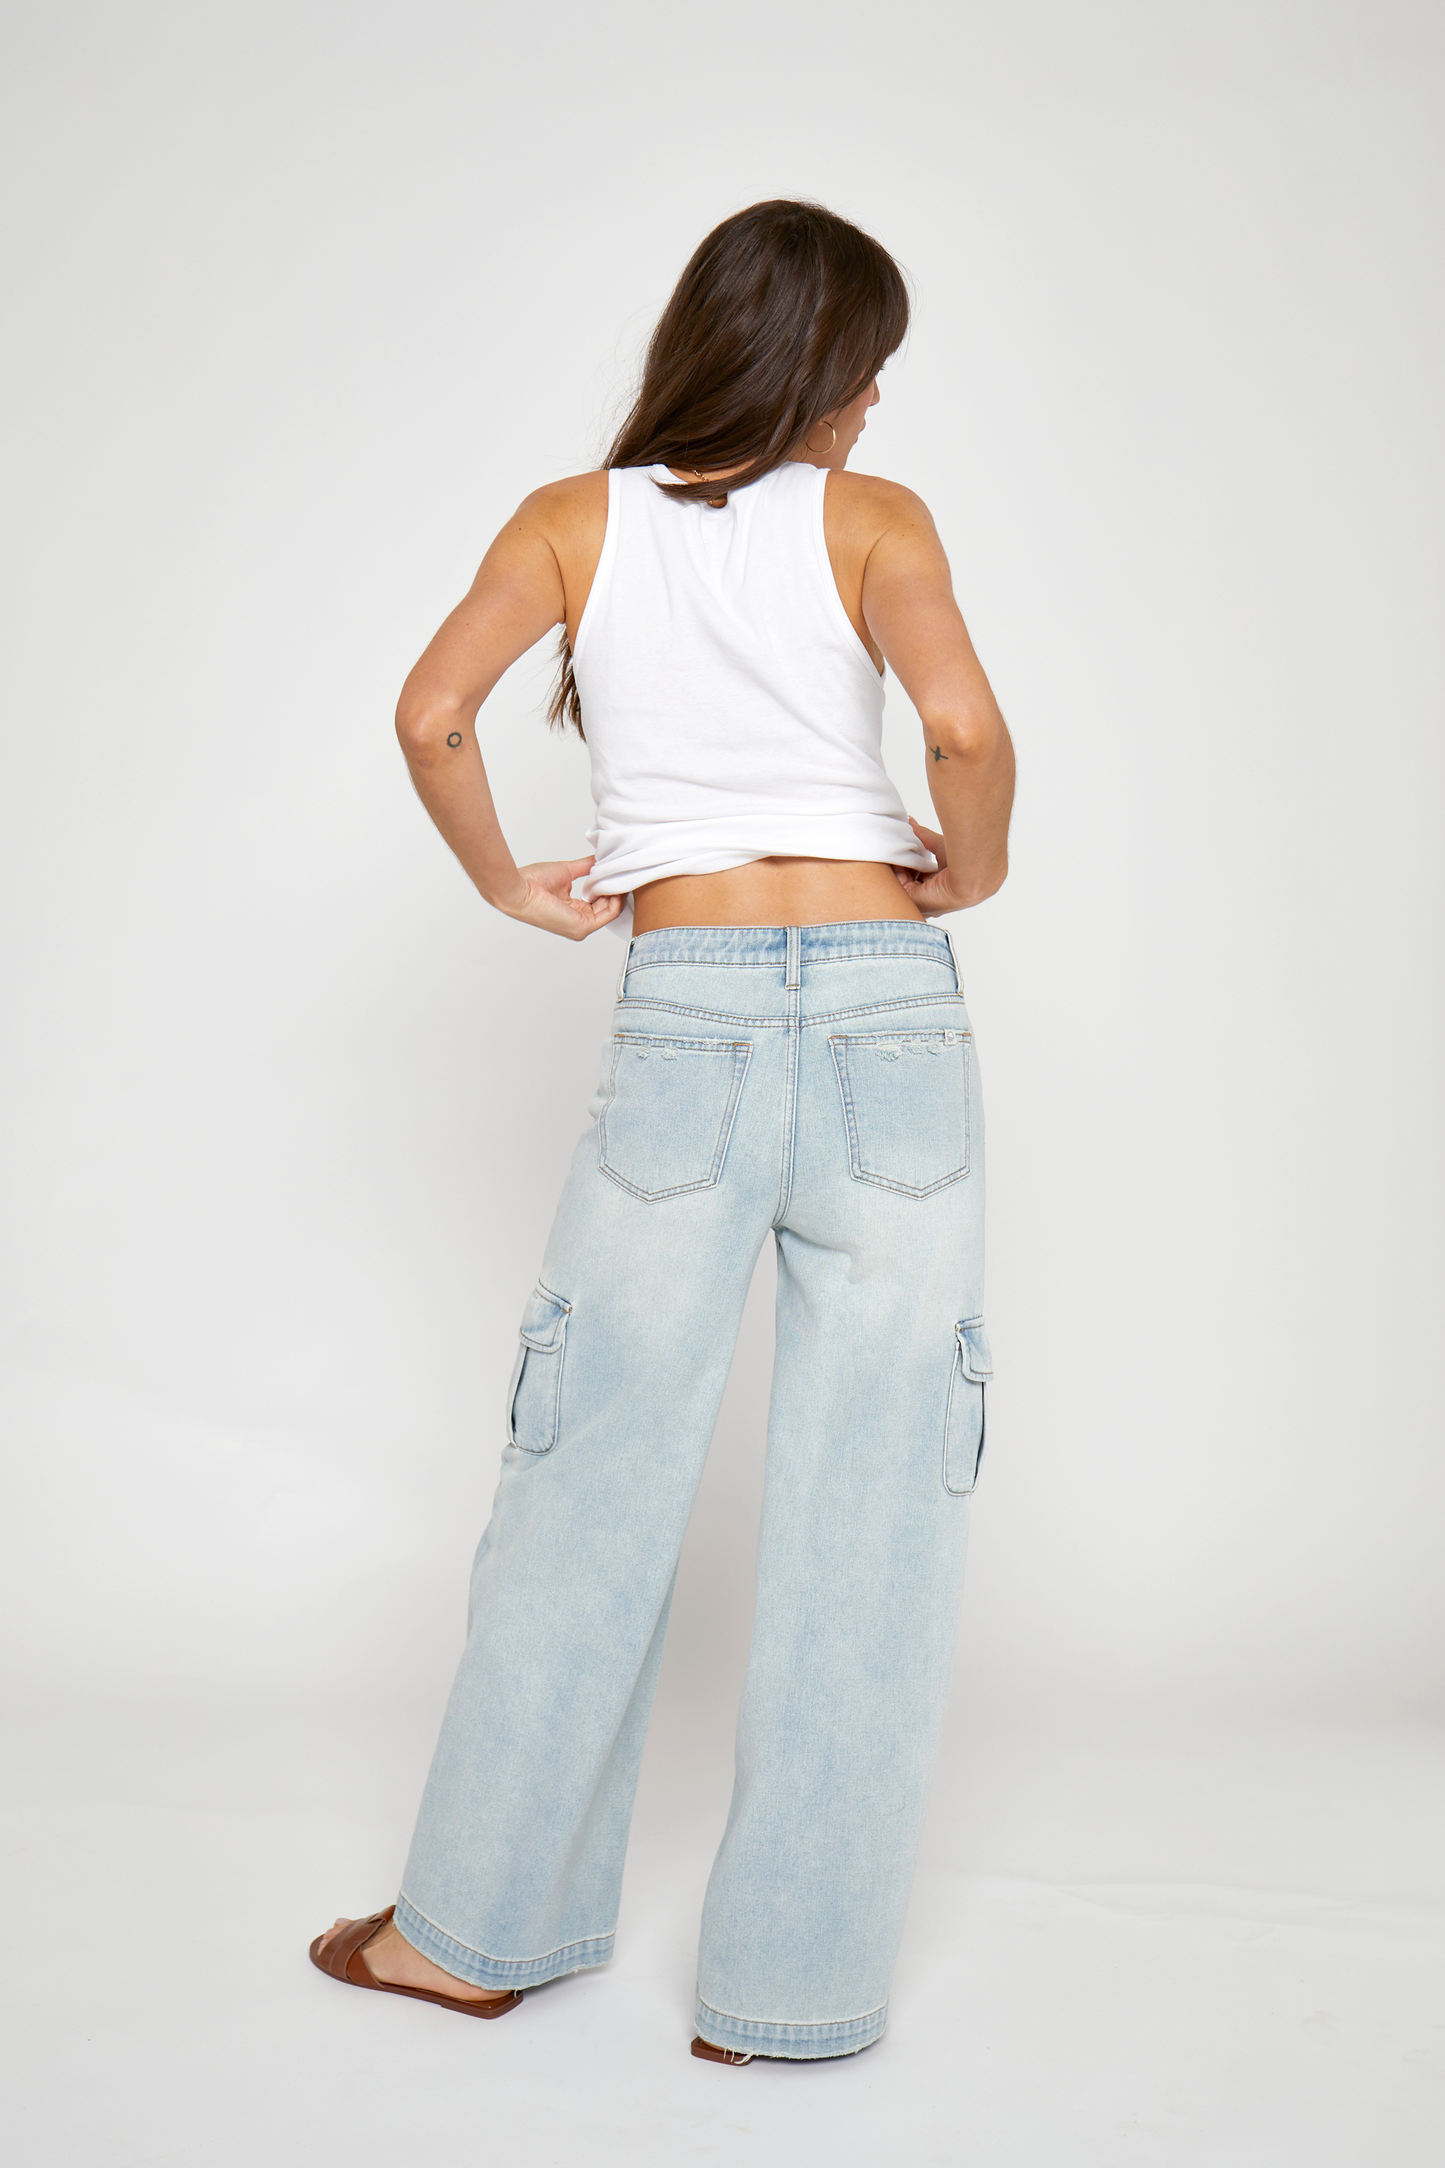 Wide leg Jeans Mid Rise Baggy The Madison Cargo Hotel Cali.: Hotel California